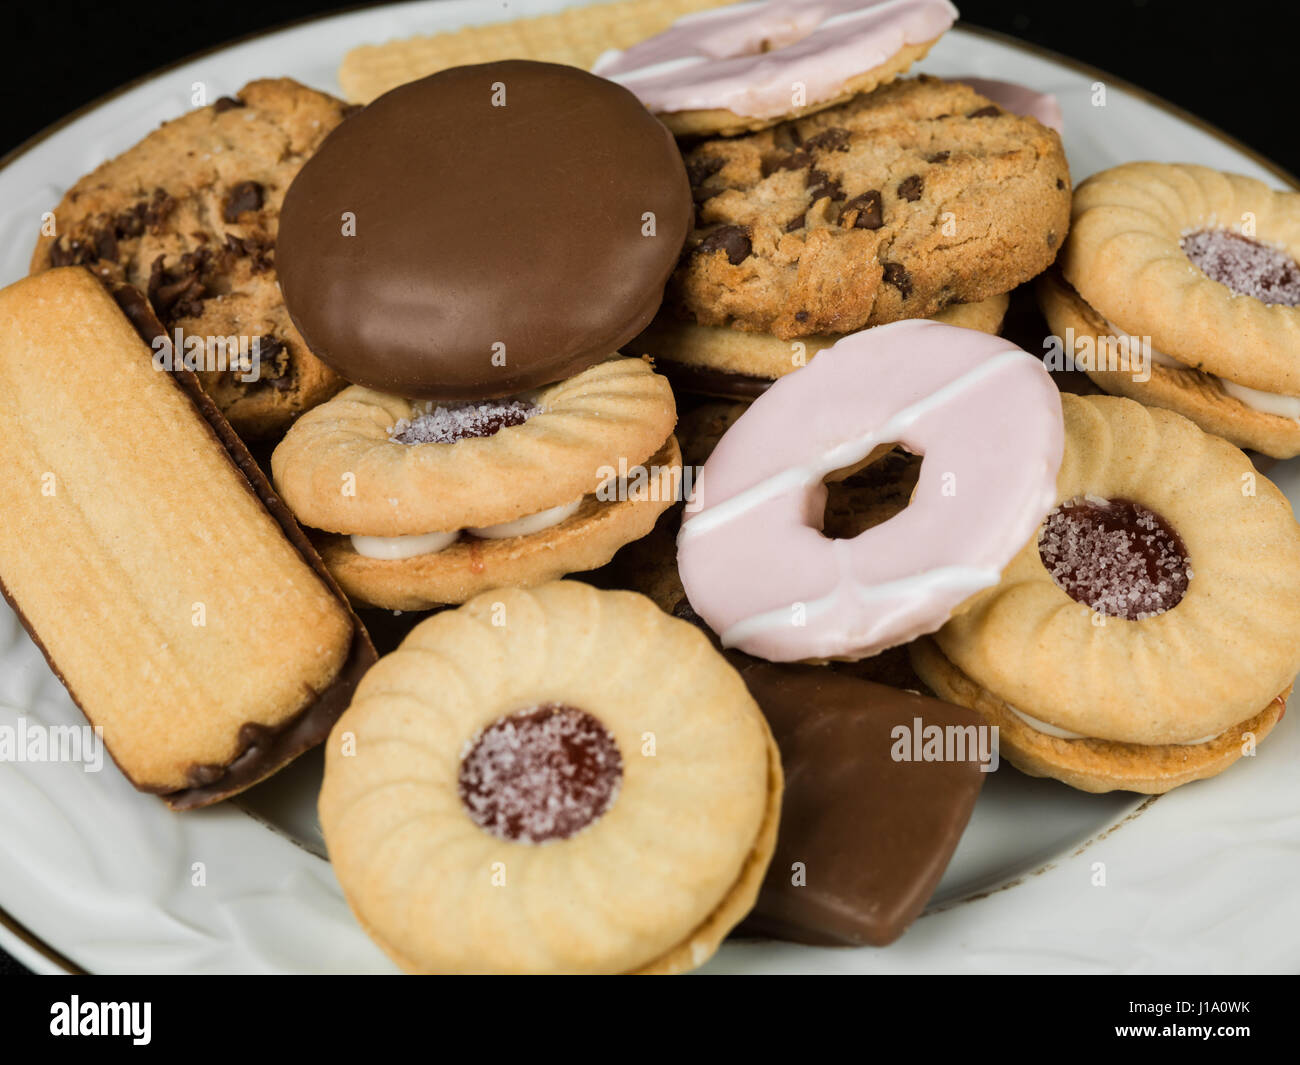 Selection of Teatime Biscuit Snacks Served on a Plate Stock Photo